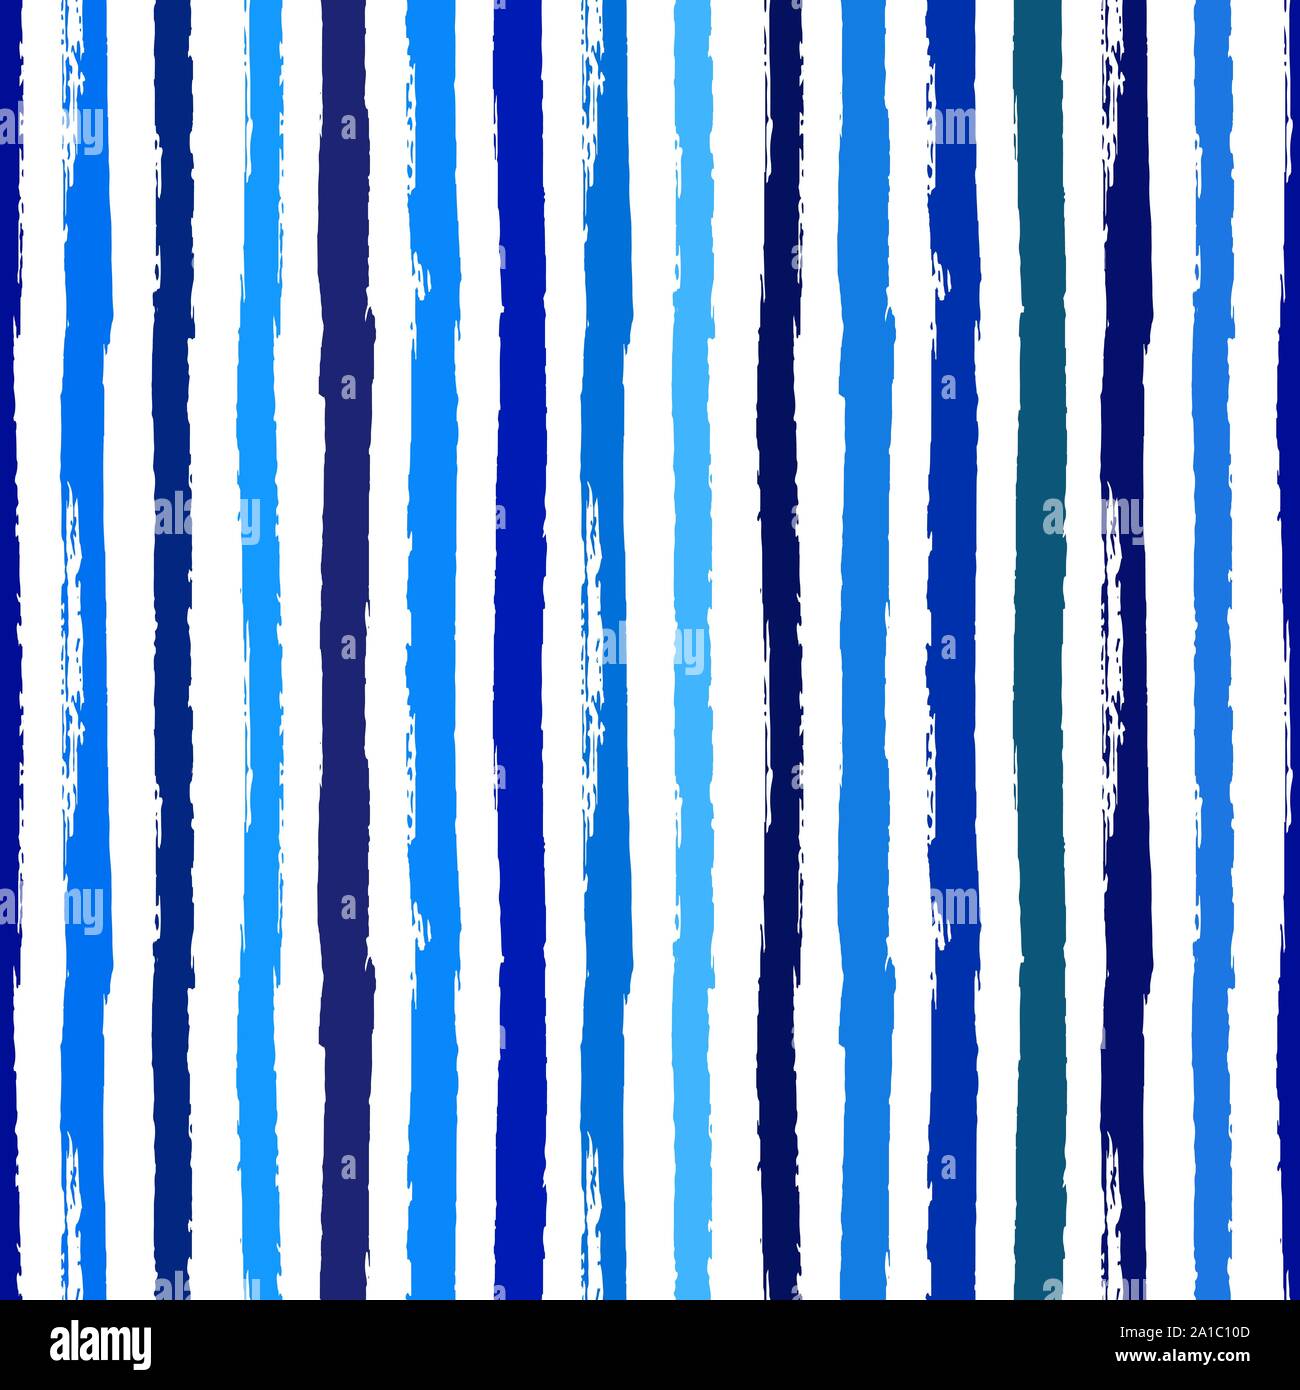 Seamless pattern vector background with blue stripes Stock Vector